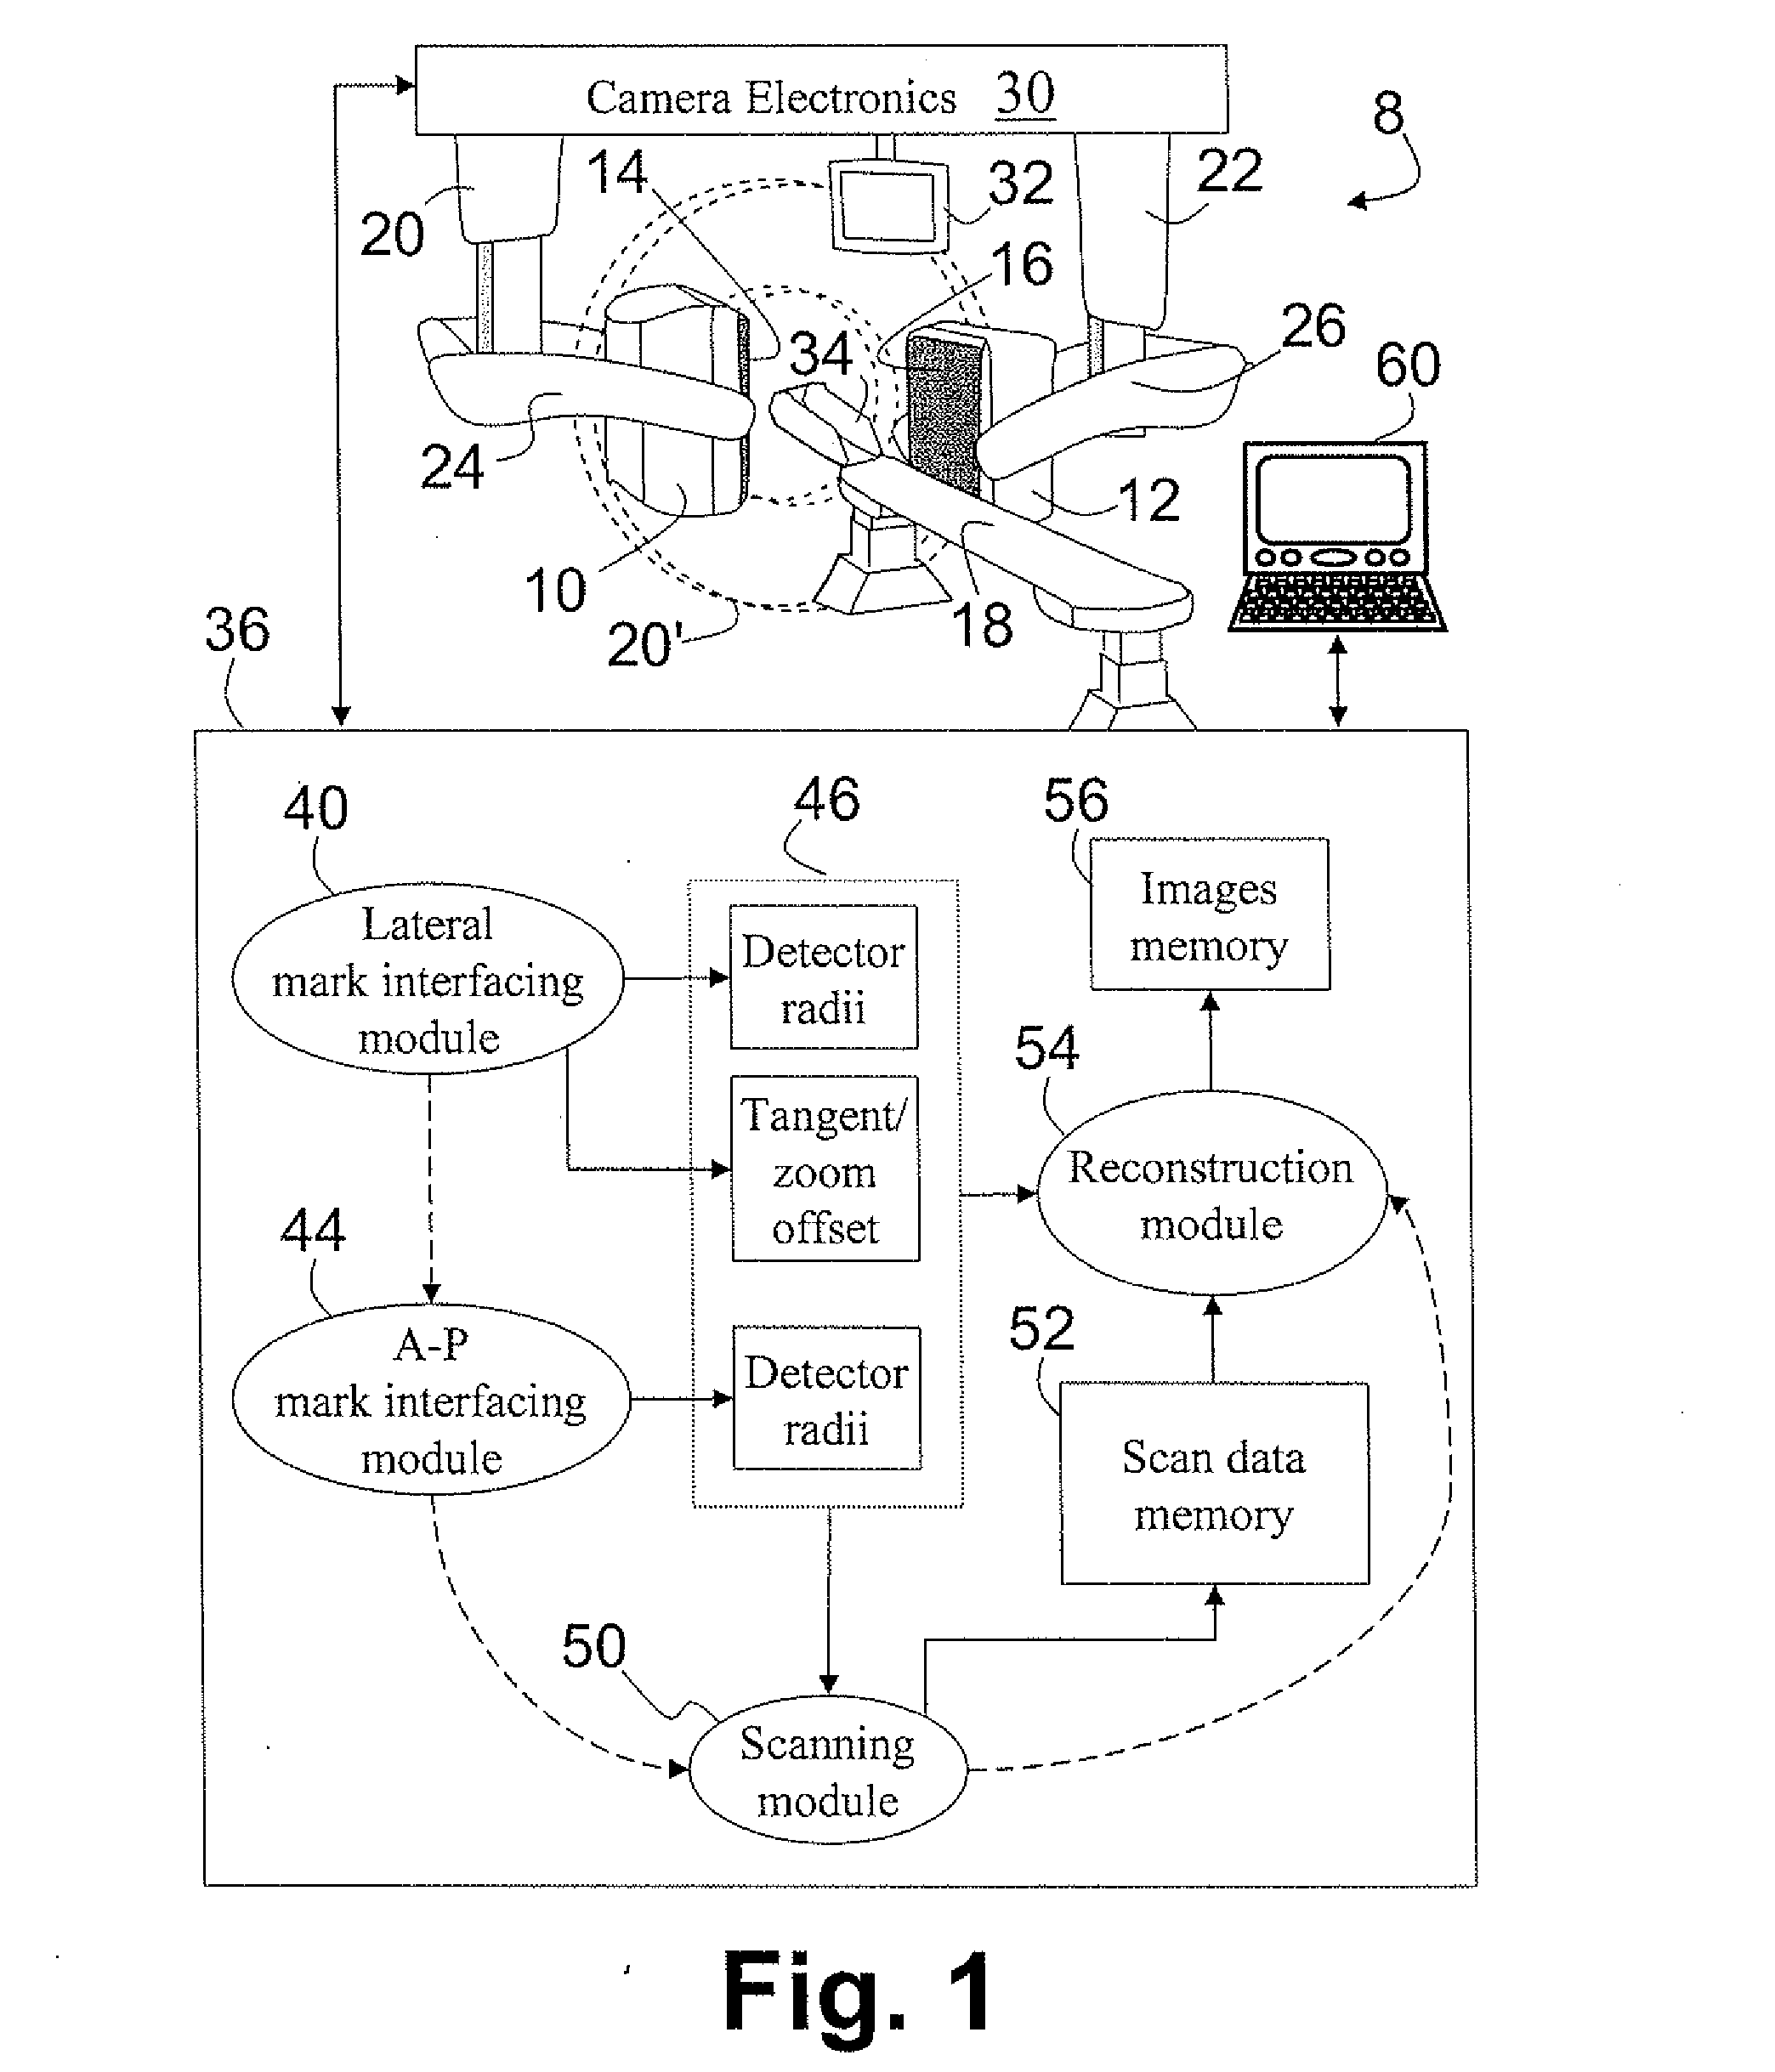 Method and apparatus for human brain imaging using a nuclear medicine camera